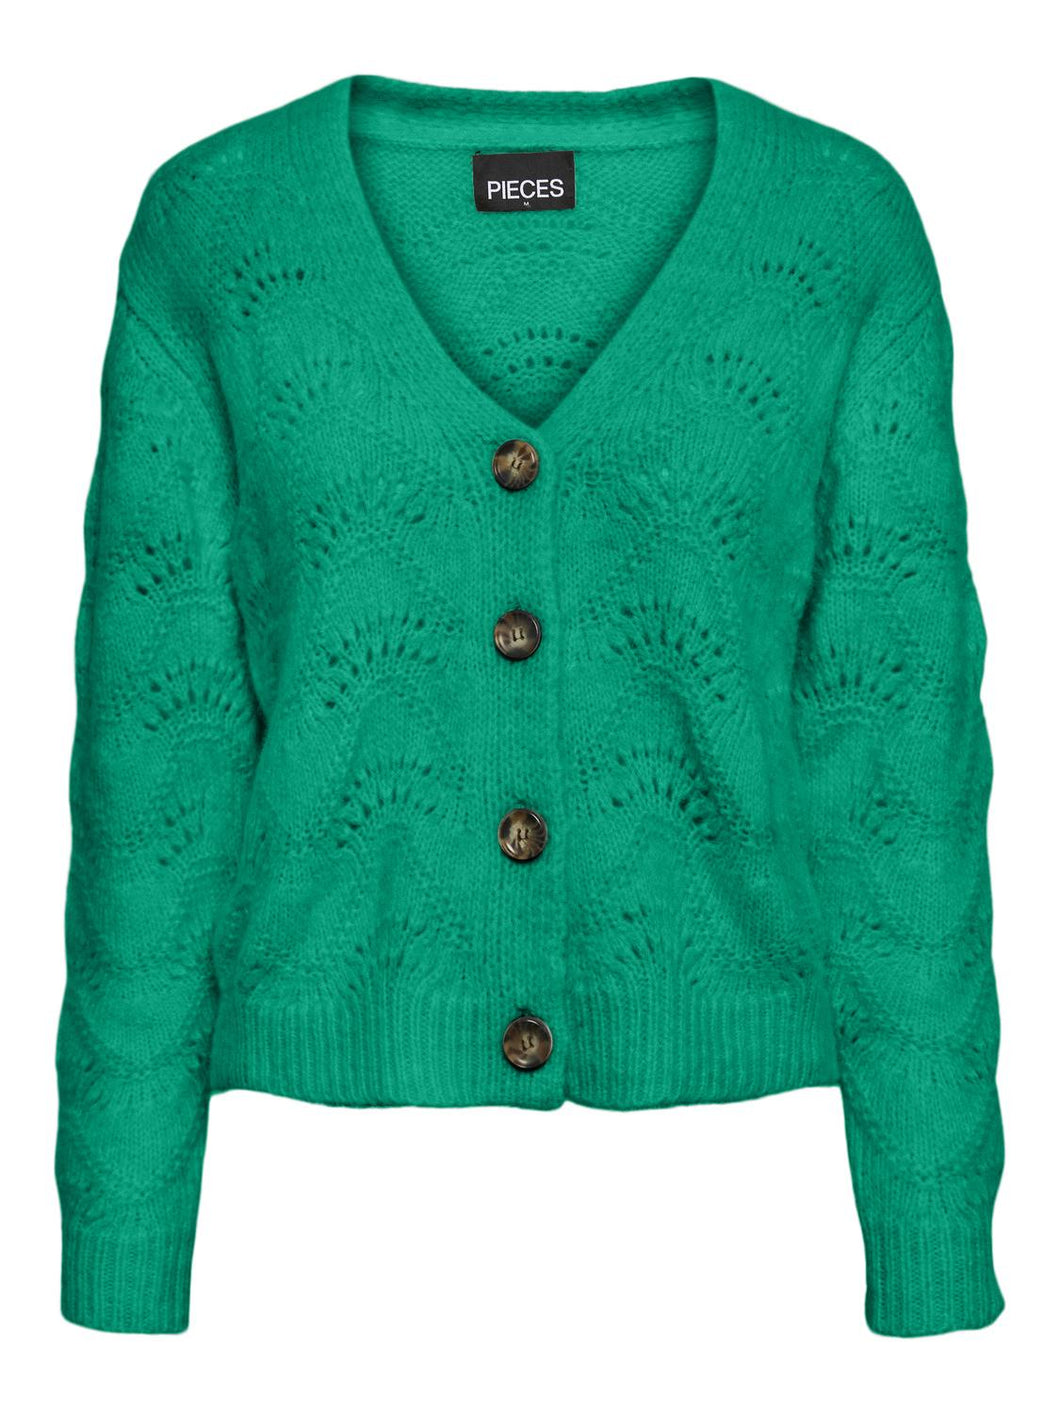 Button Up Green Cardigan